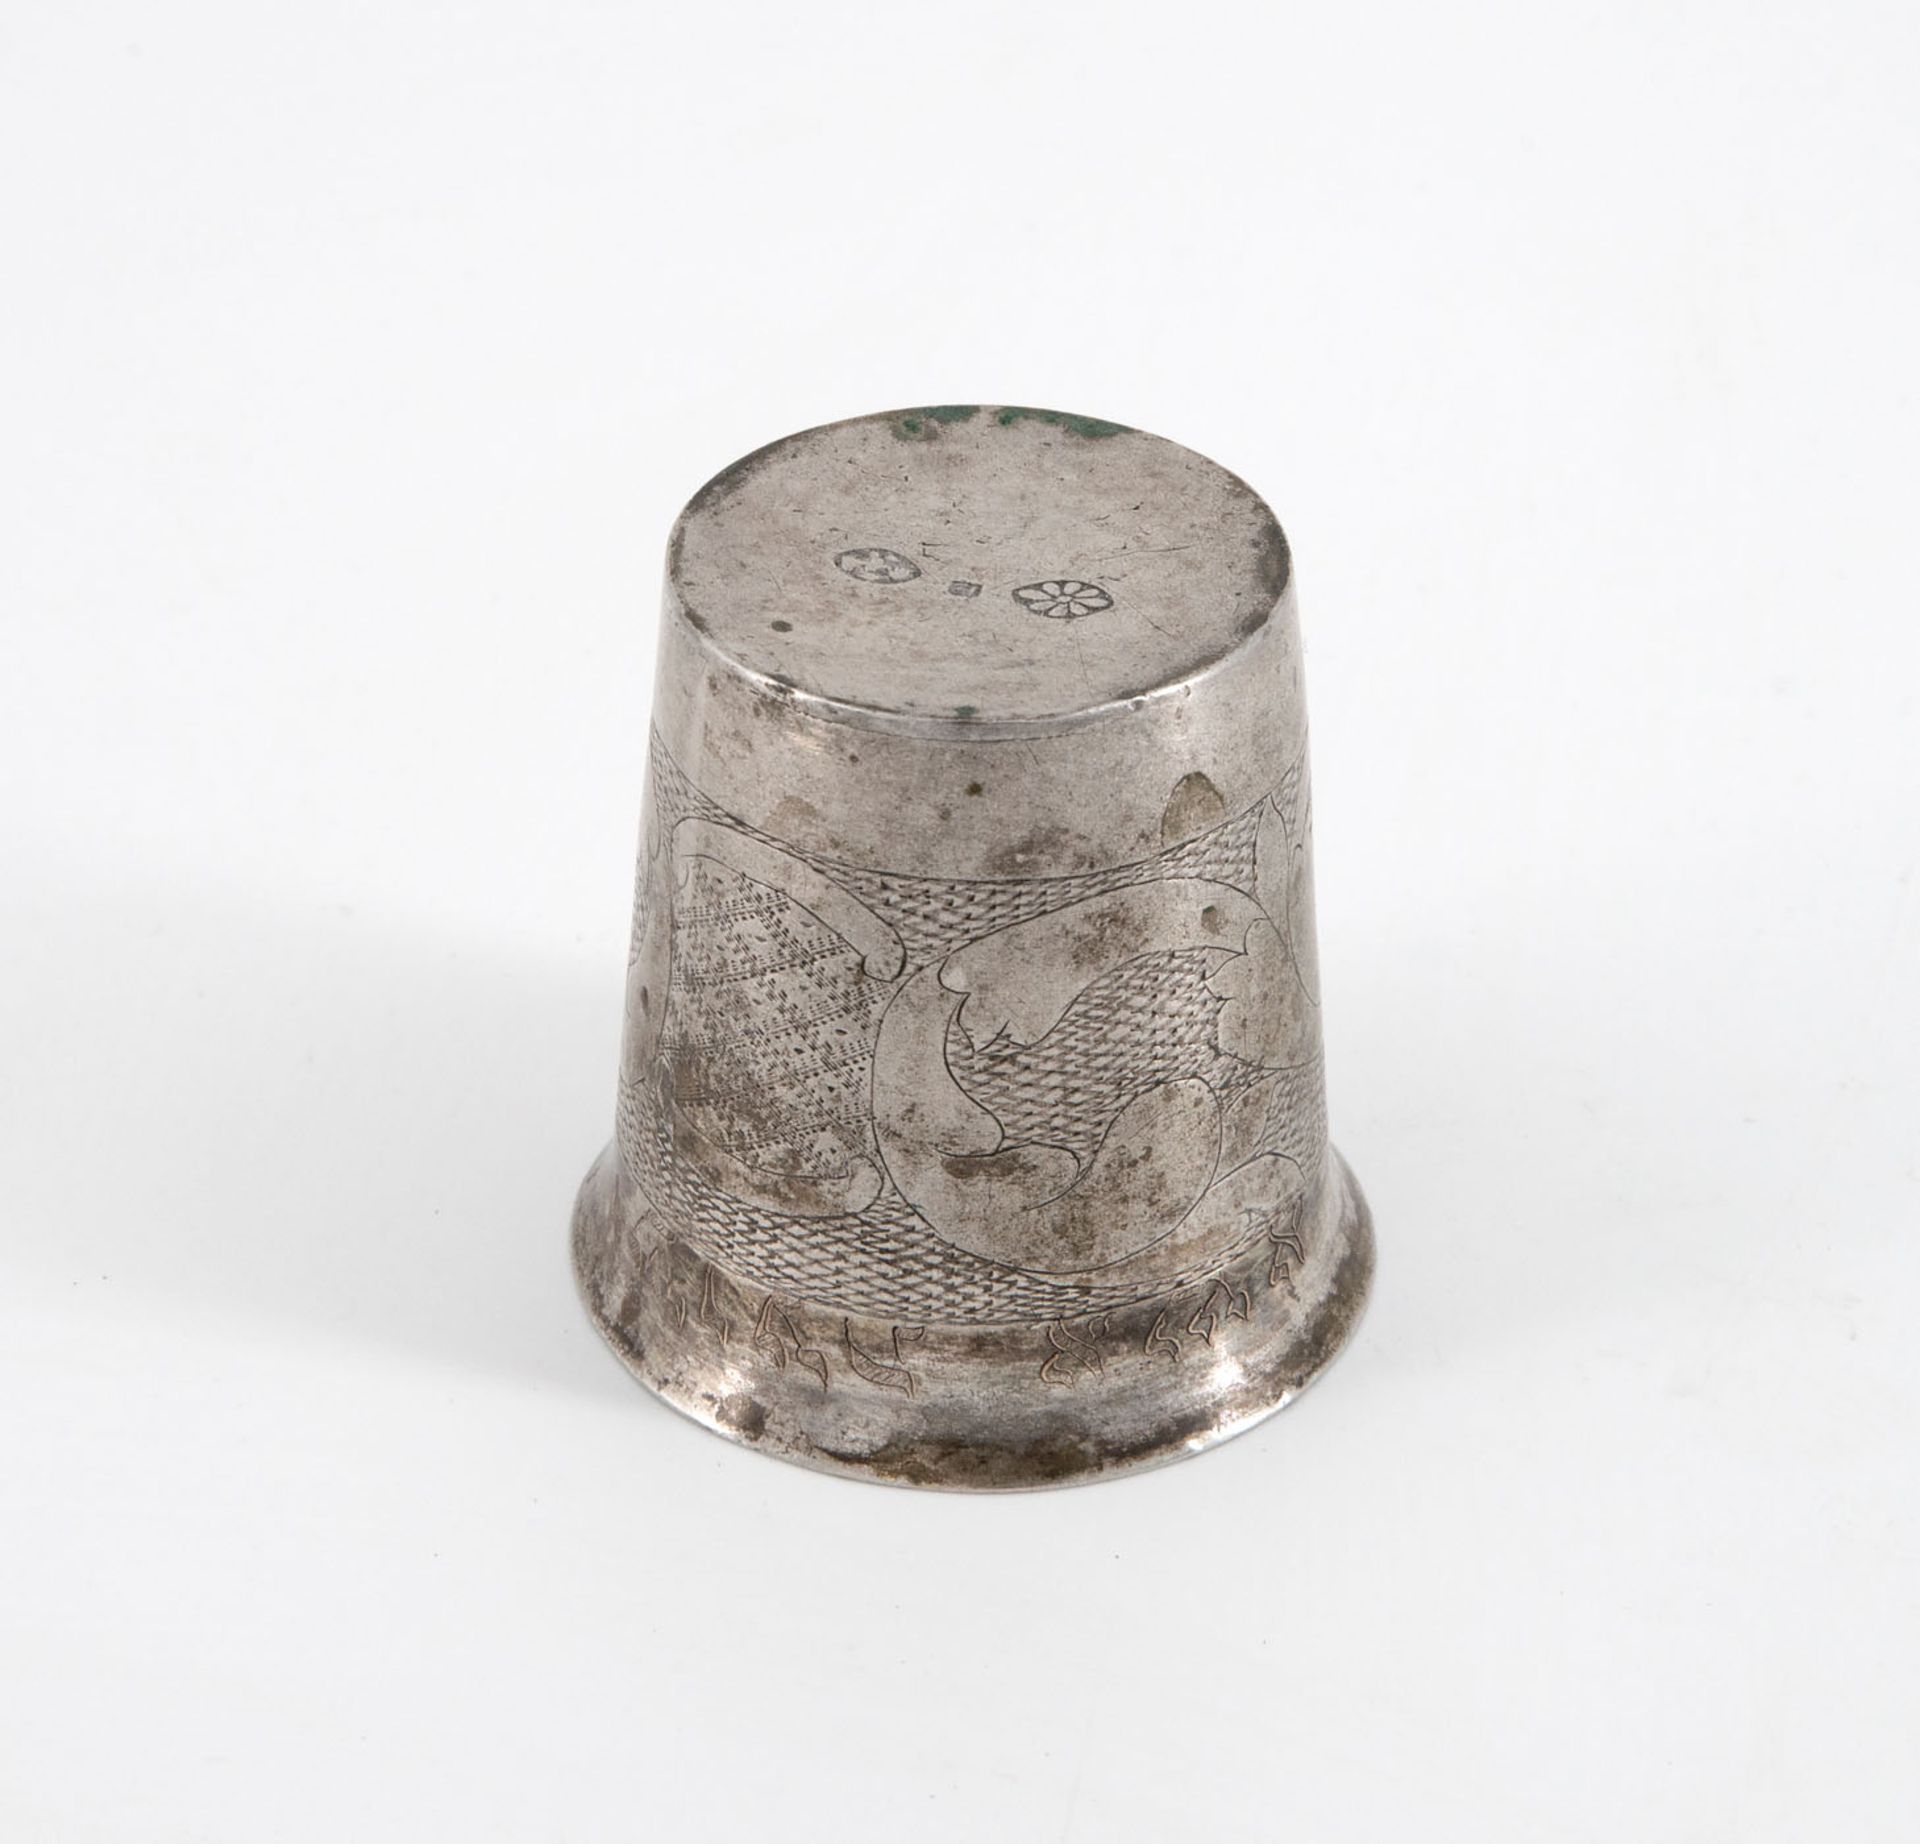 A Silver Kiddush Cup, Poland, Late 18th Early 19th Century - Image 3 of 5